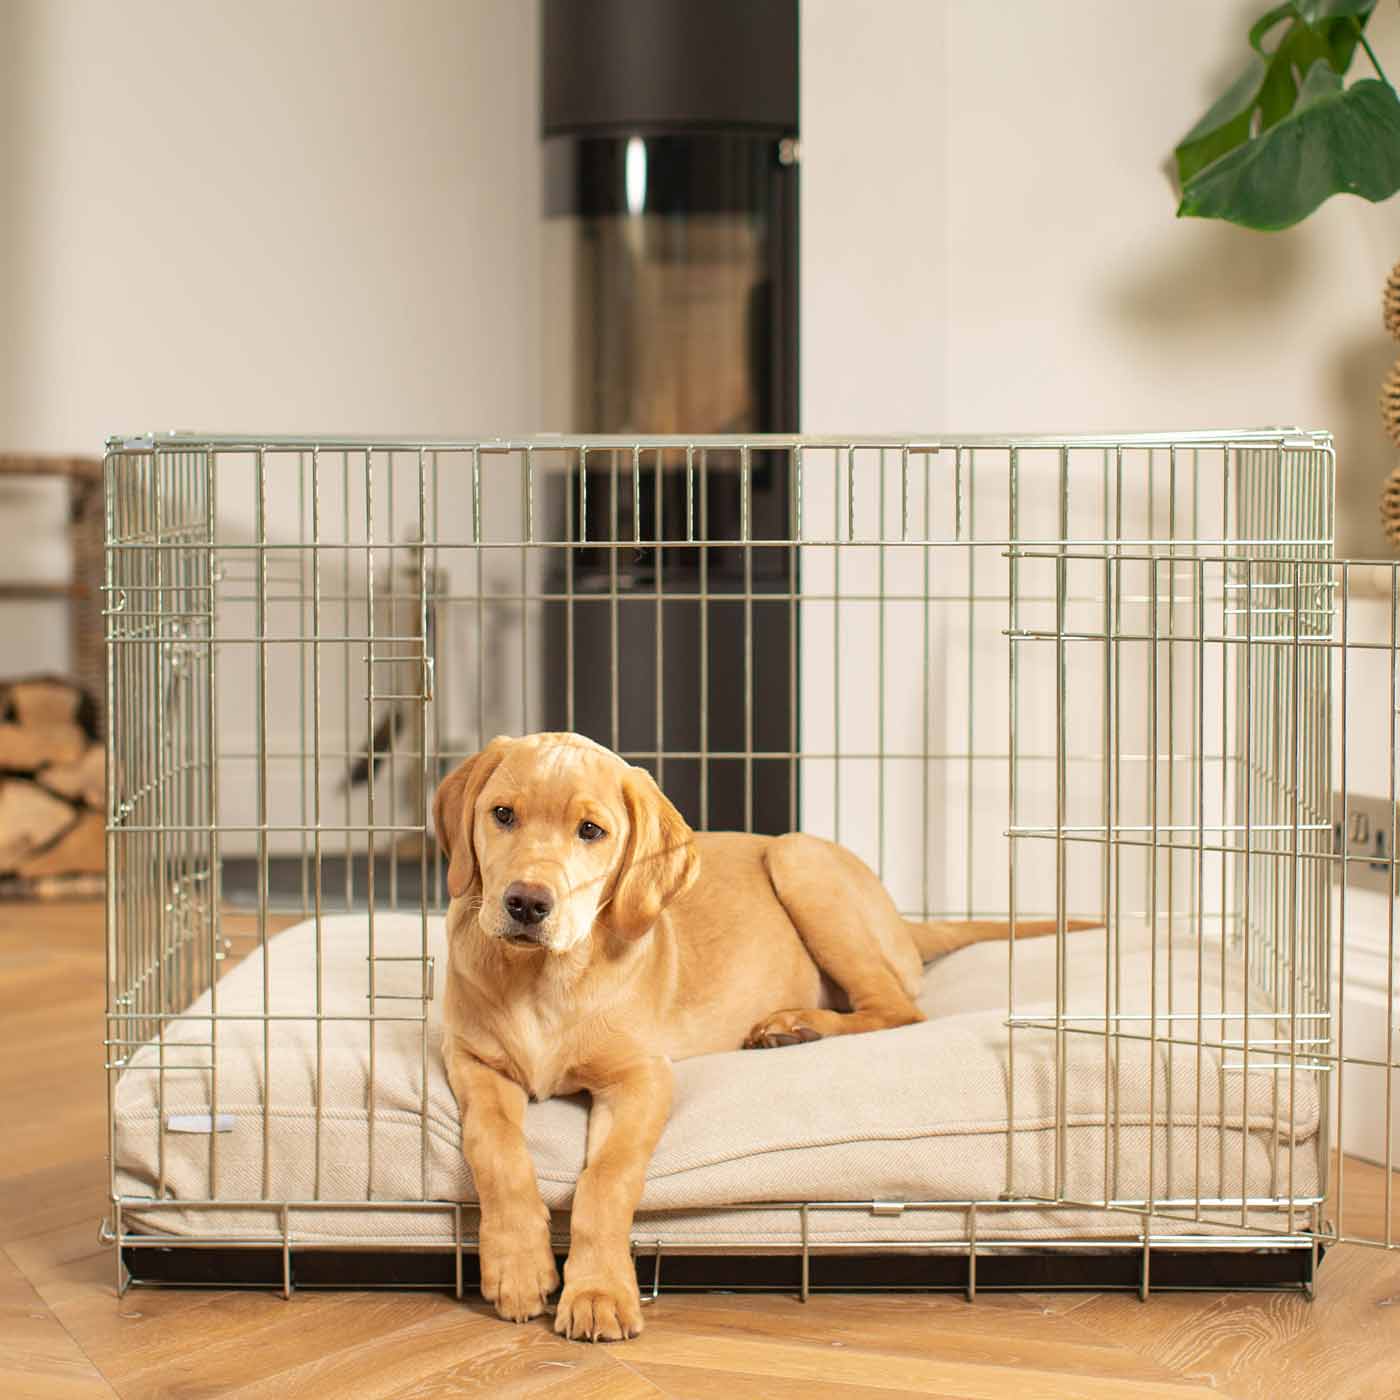 Luxury Dog Crate Cushion, Natural Herringbone Tweed Crate Cushion The Perfect Dog Crate Accessory, Available To Personalise Now at Lords & Labradors